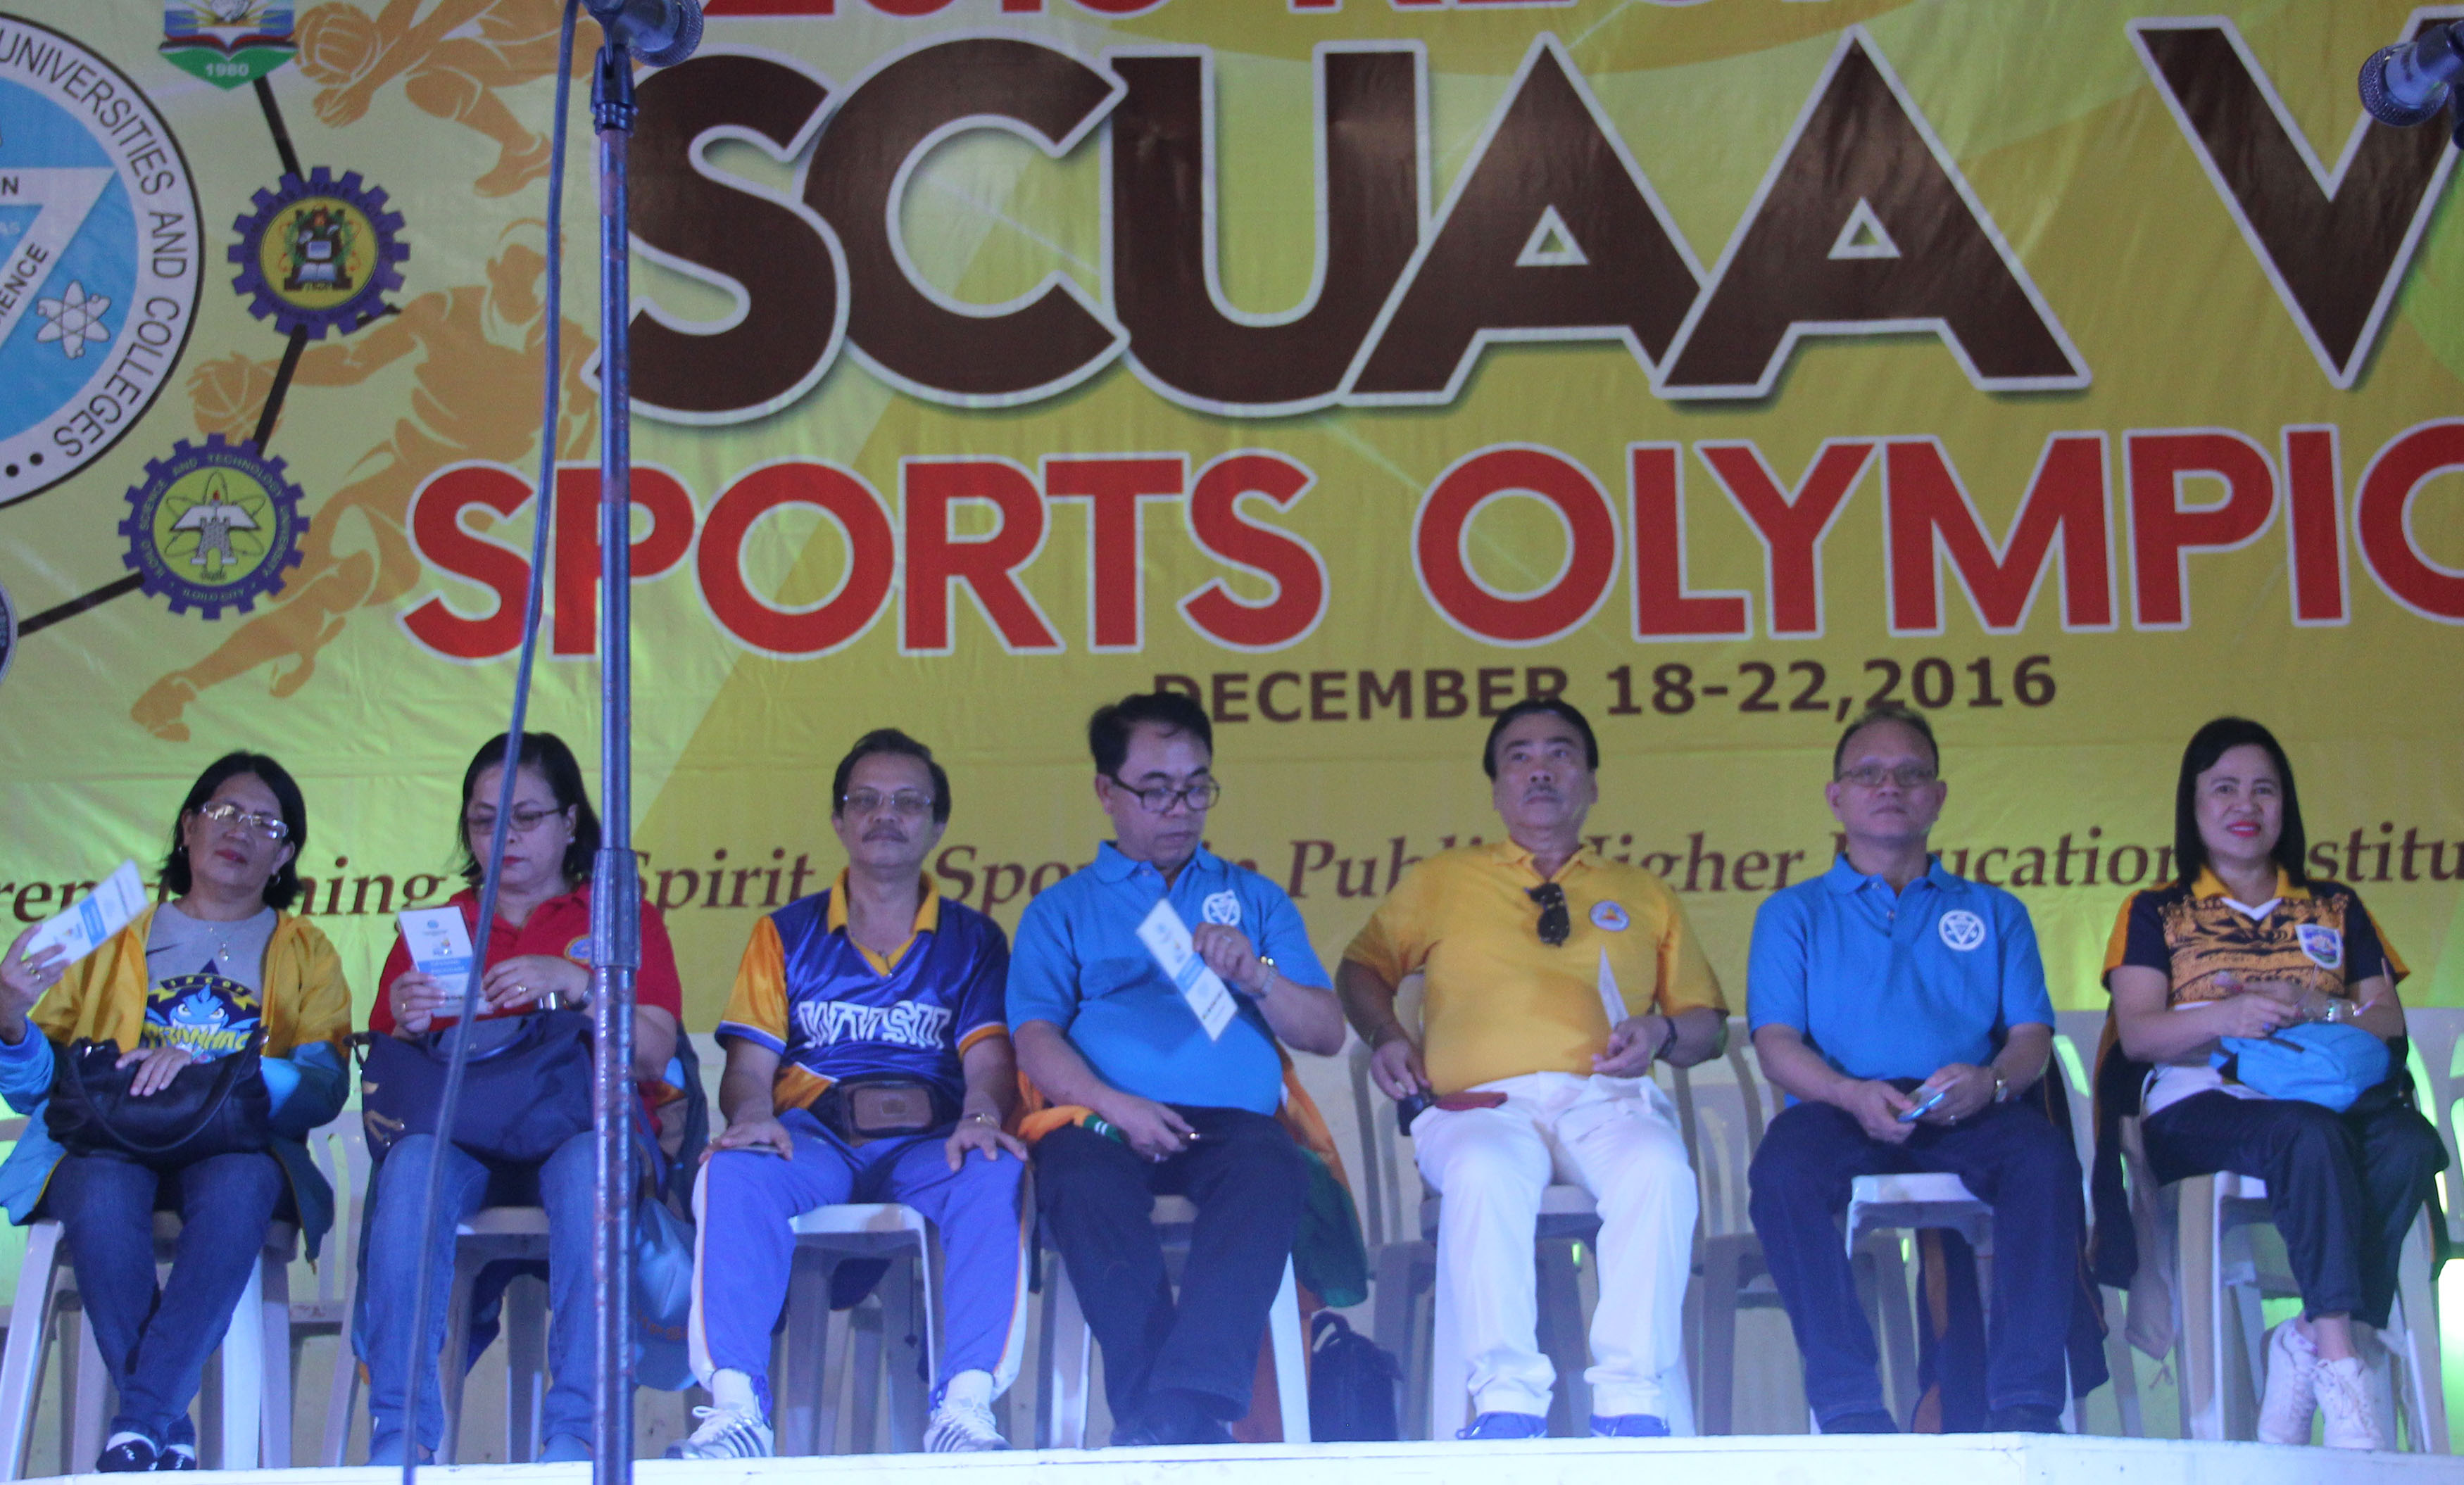 The Philippine Association of State Universities and Colleges (PASUC) VI presidents at the opening program of SCUAA 2016. From left, Dr. Theresa Palmares-Nothern iloilo Polytechnic State College, Dr. Percy Perez, tate College of Fisherires, Dr. Luis T. Sorolla- West Visayas State University, Dr. Danilo E. Abayon, Aklan State University, Dr. Victor E. Navarra, University of Antique, Dr. Raul F. Muyong, Iloilo Science and Technology University, Dr. Editha C. Alfon-Capiz State university.